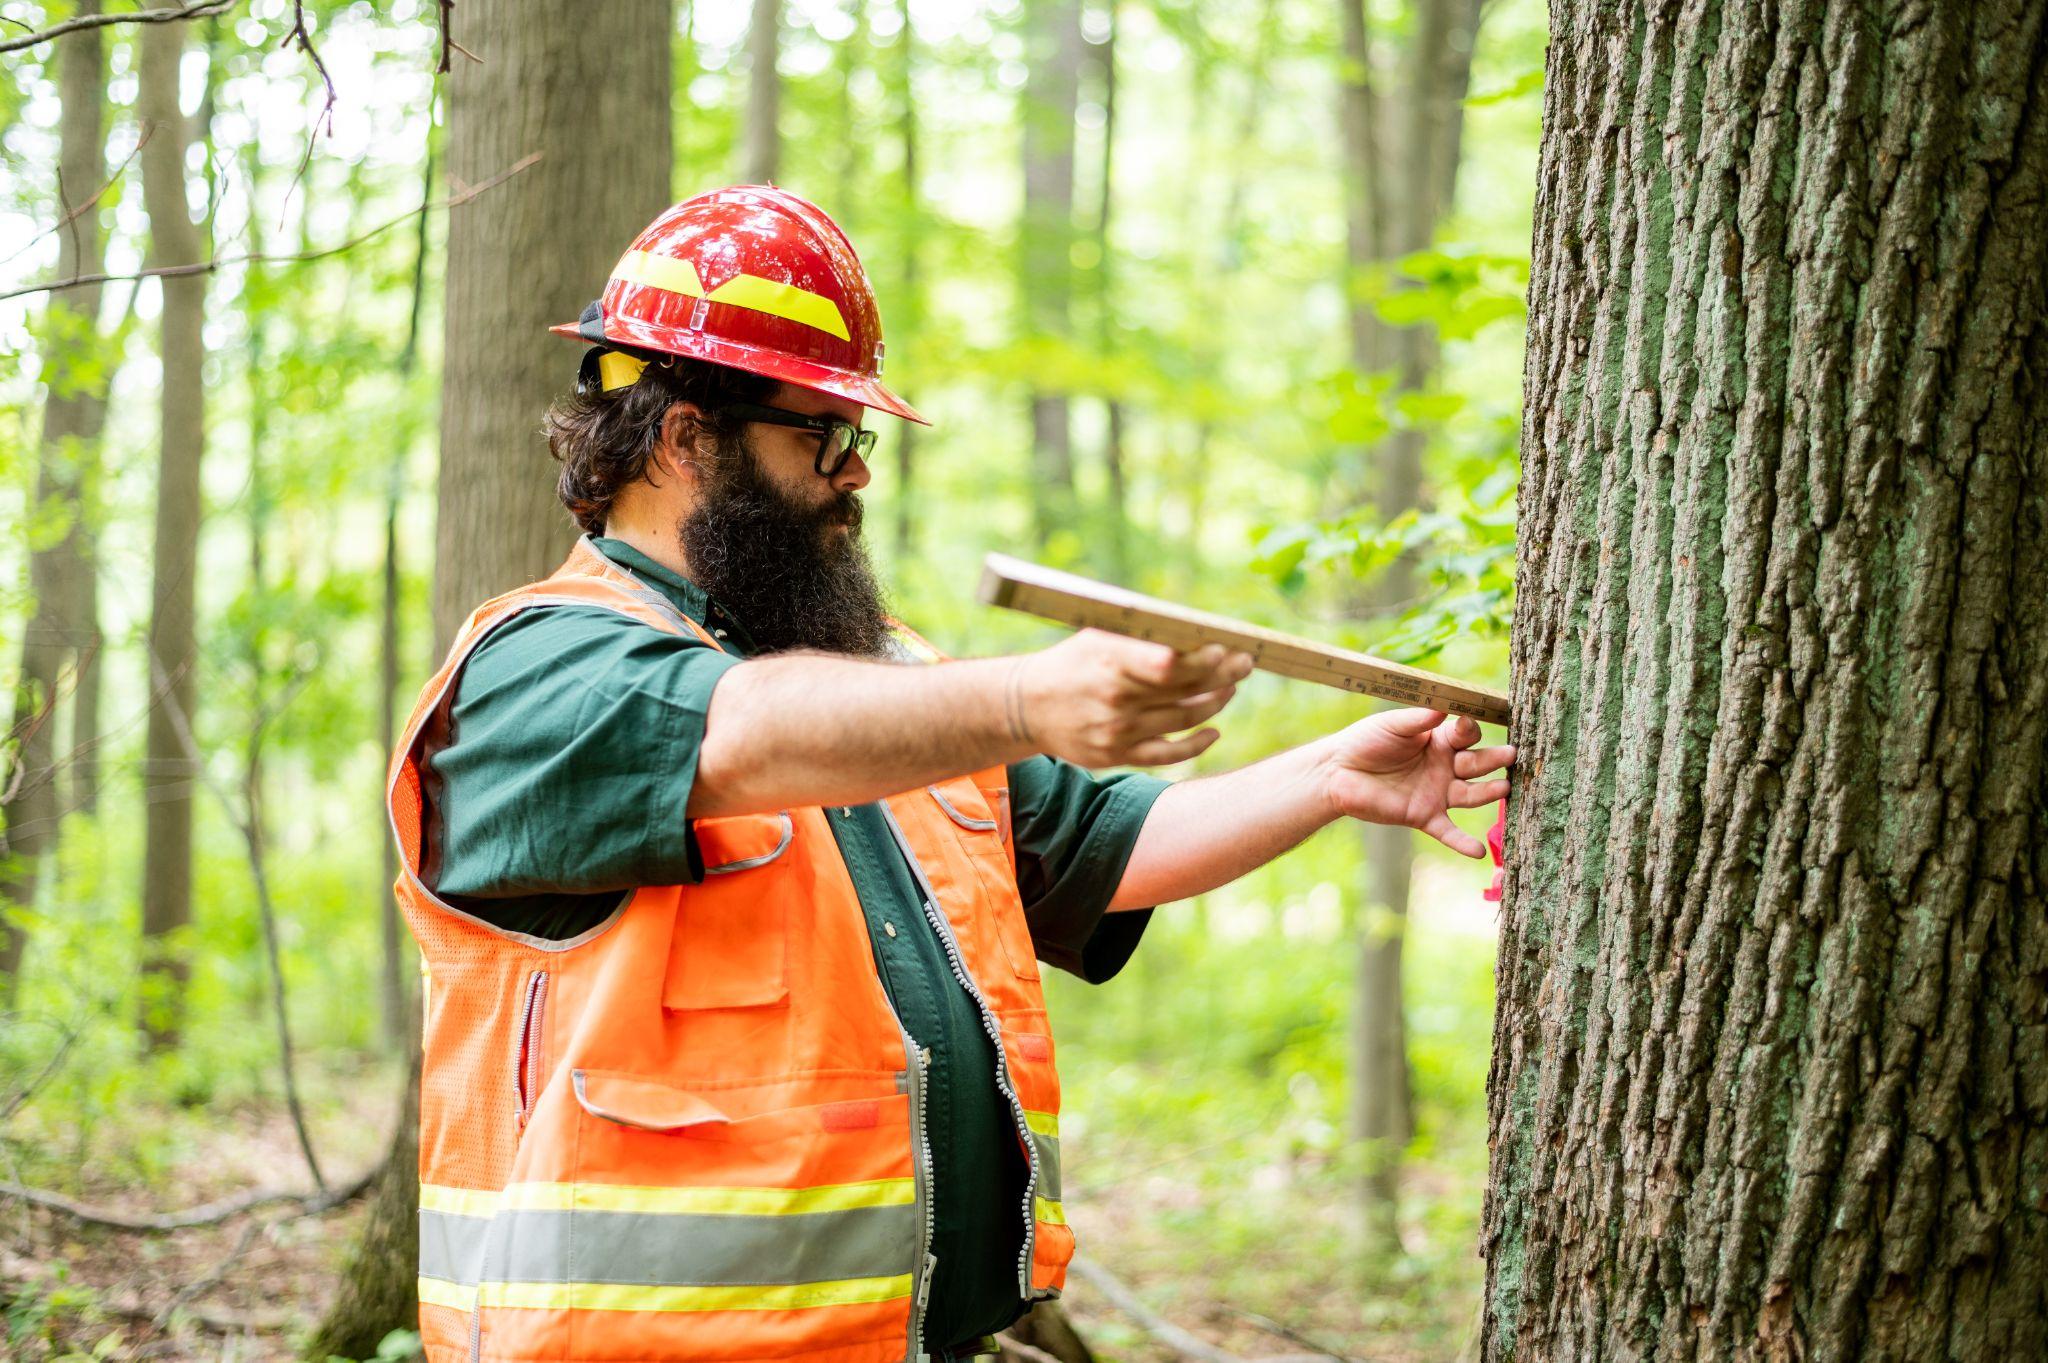 Working in nature starts here: Division of Forestry Internship Program